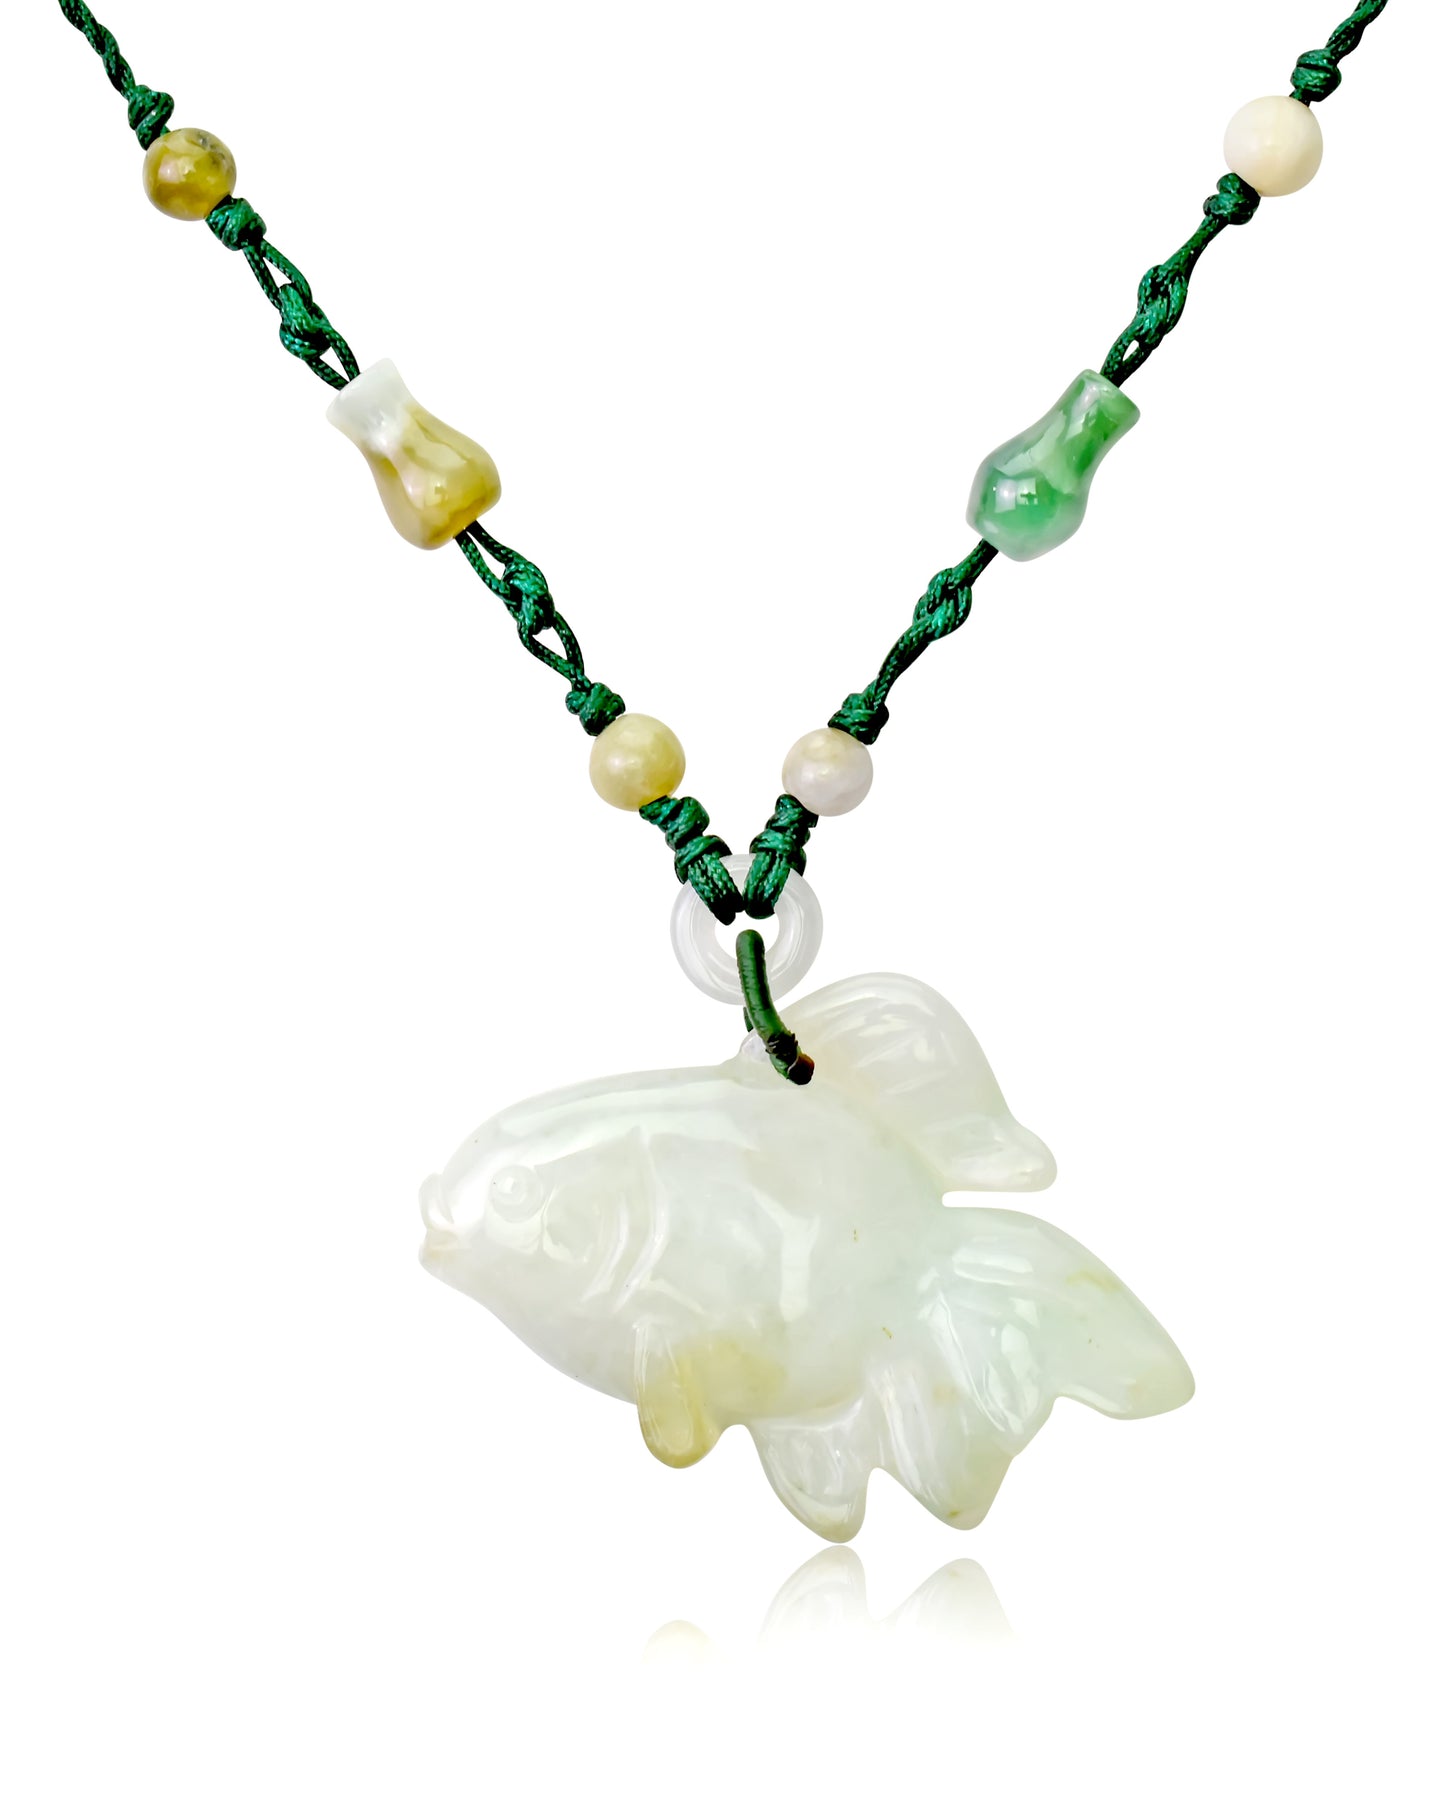 Accessorize in Style with a Hand Carved Crown Tail Fish Jade Pendant